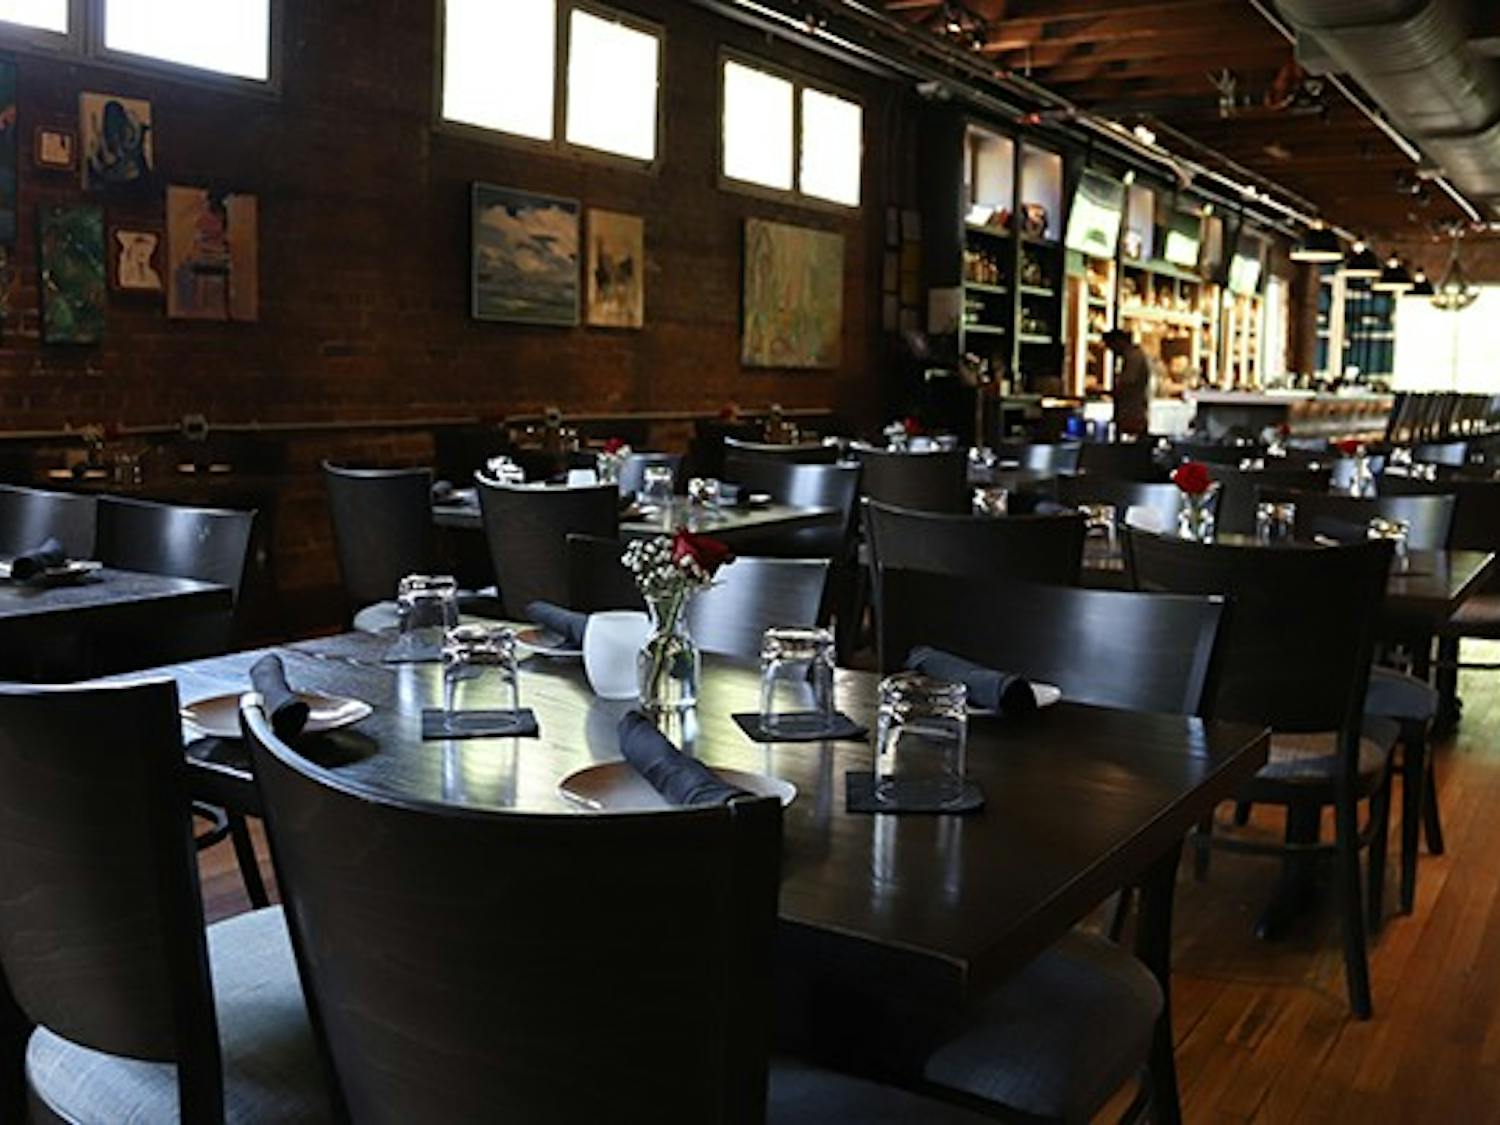 The inside of Hendrix , which is located above The Woody, includes many nicely set tables and a large bar.